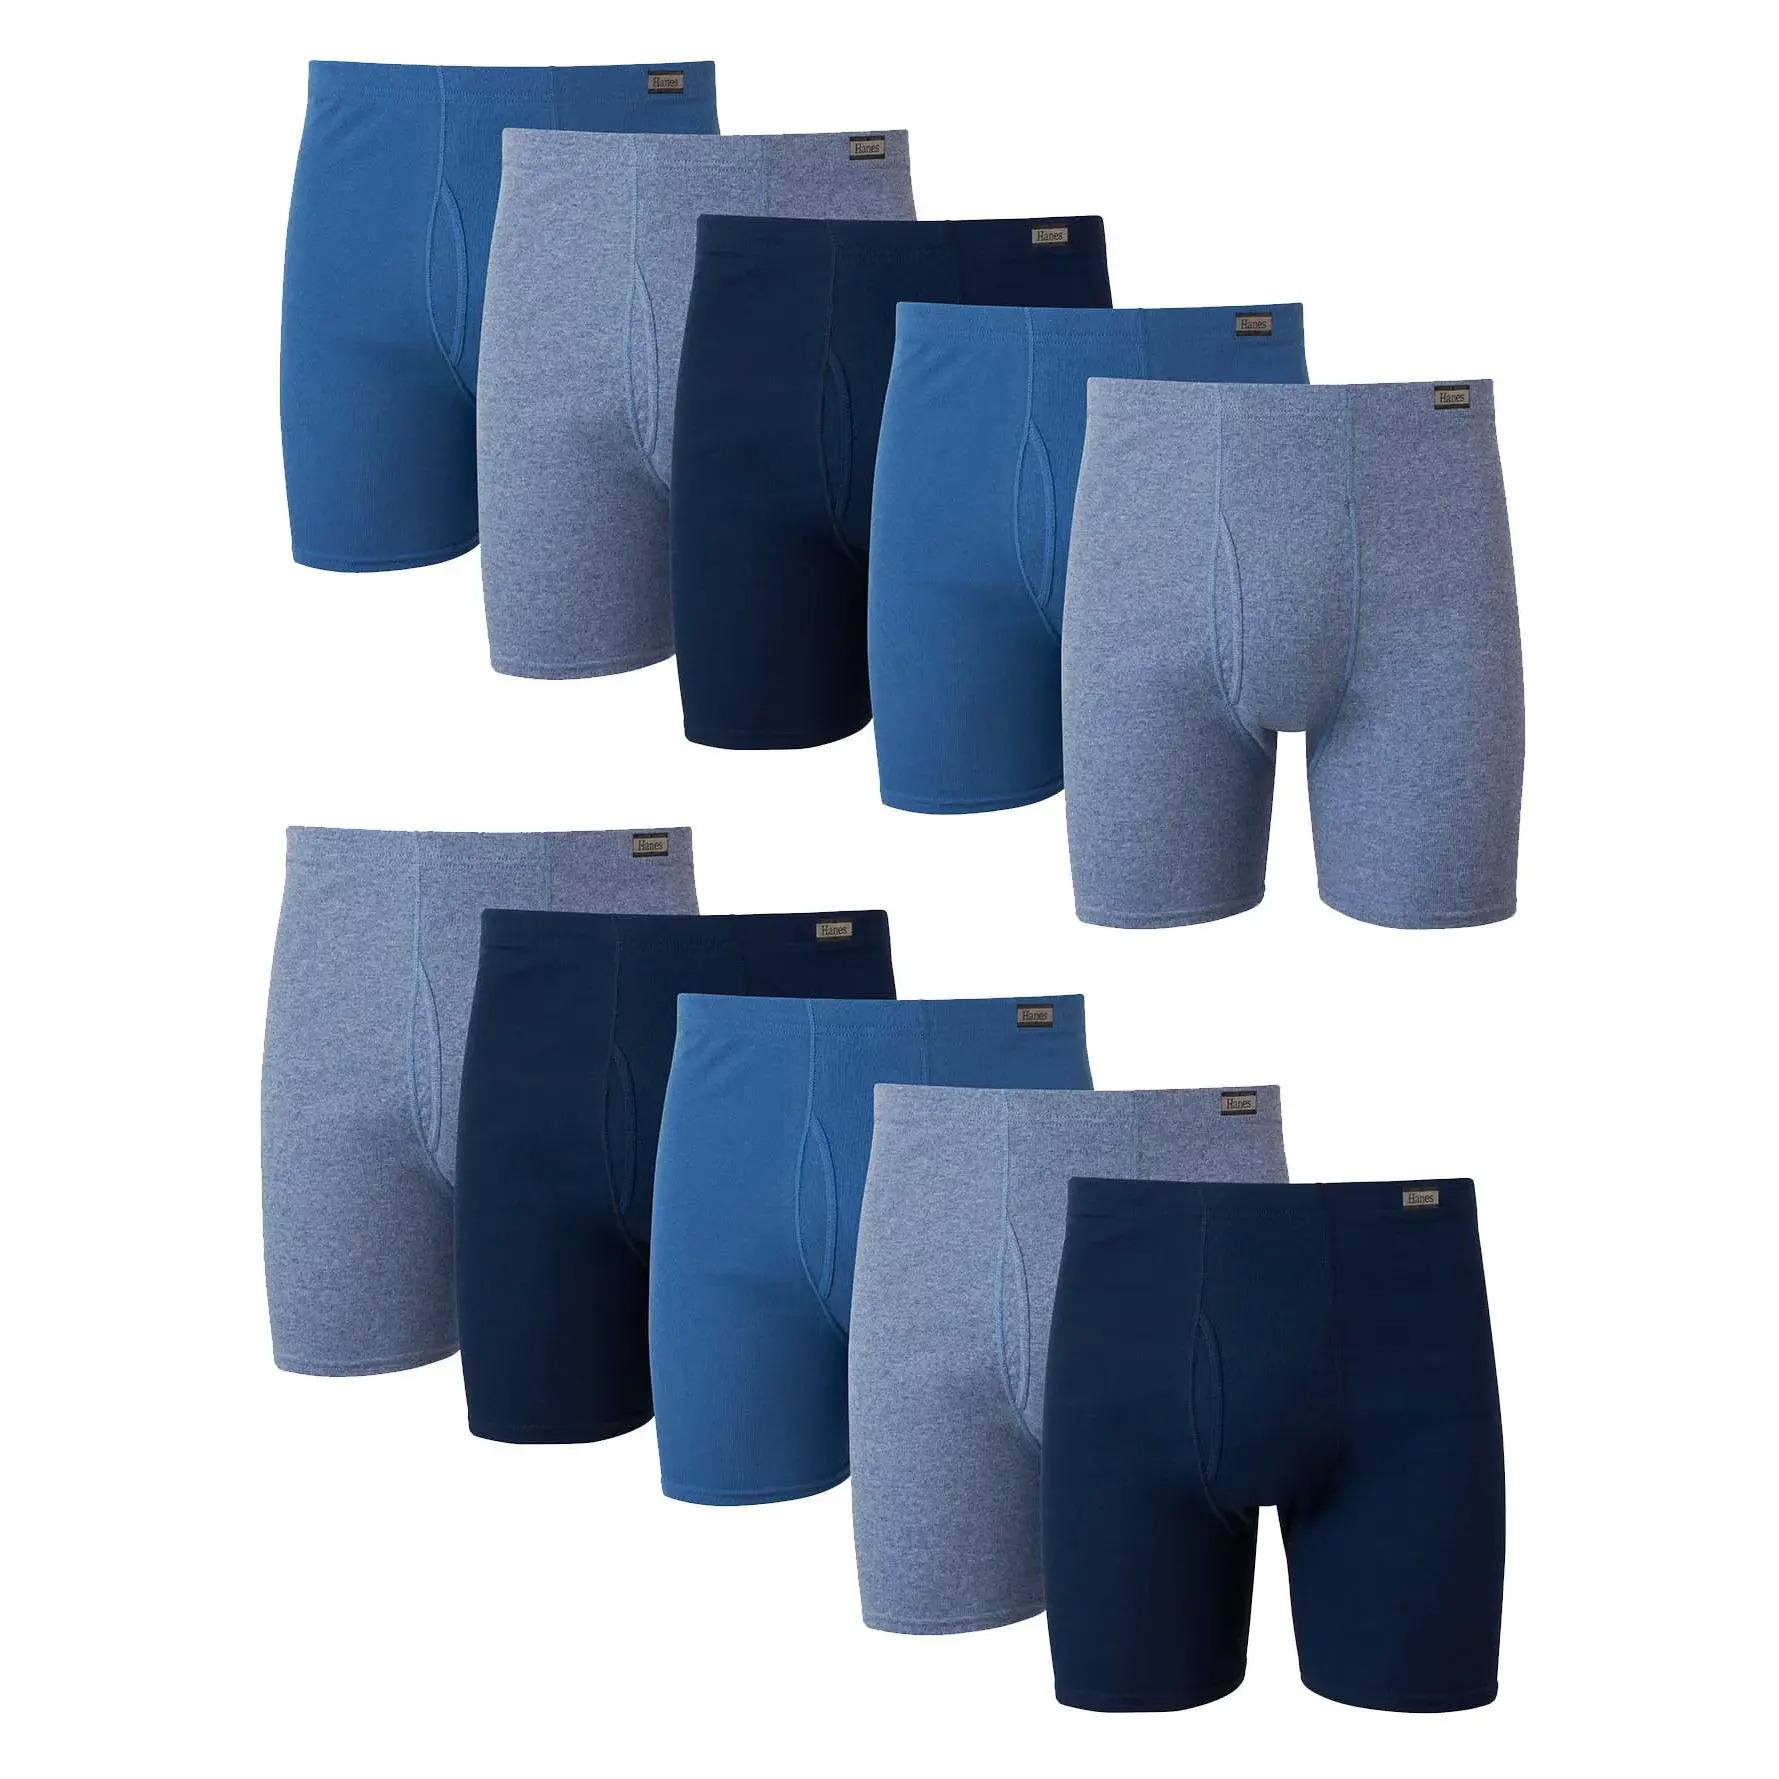 Hanes Tagless Boxer Briefs 10-Pack for $19.98